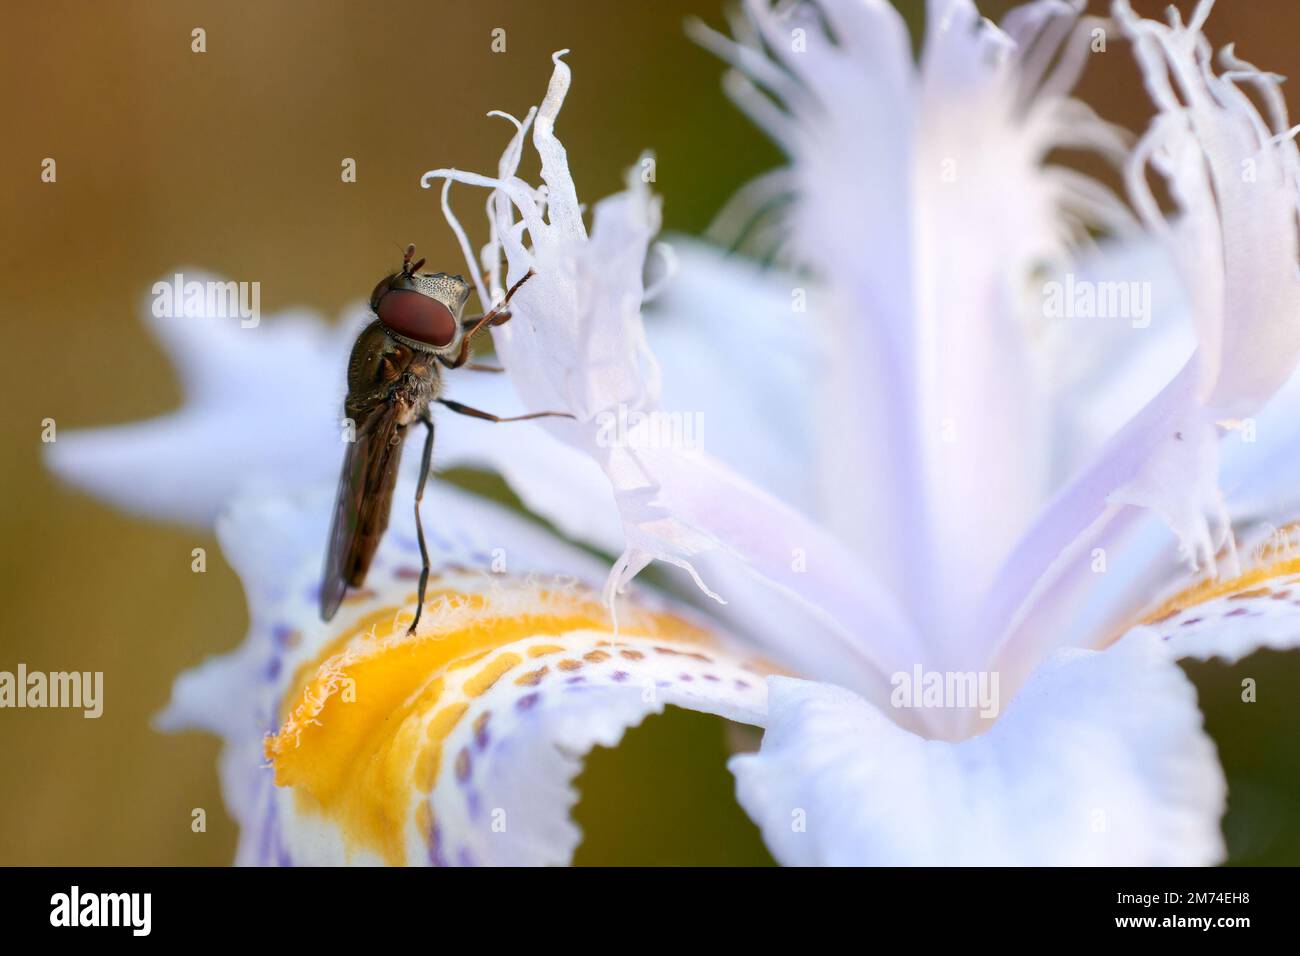 Macro shot of hover fly standing on lily flower petal. Stock Photo